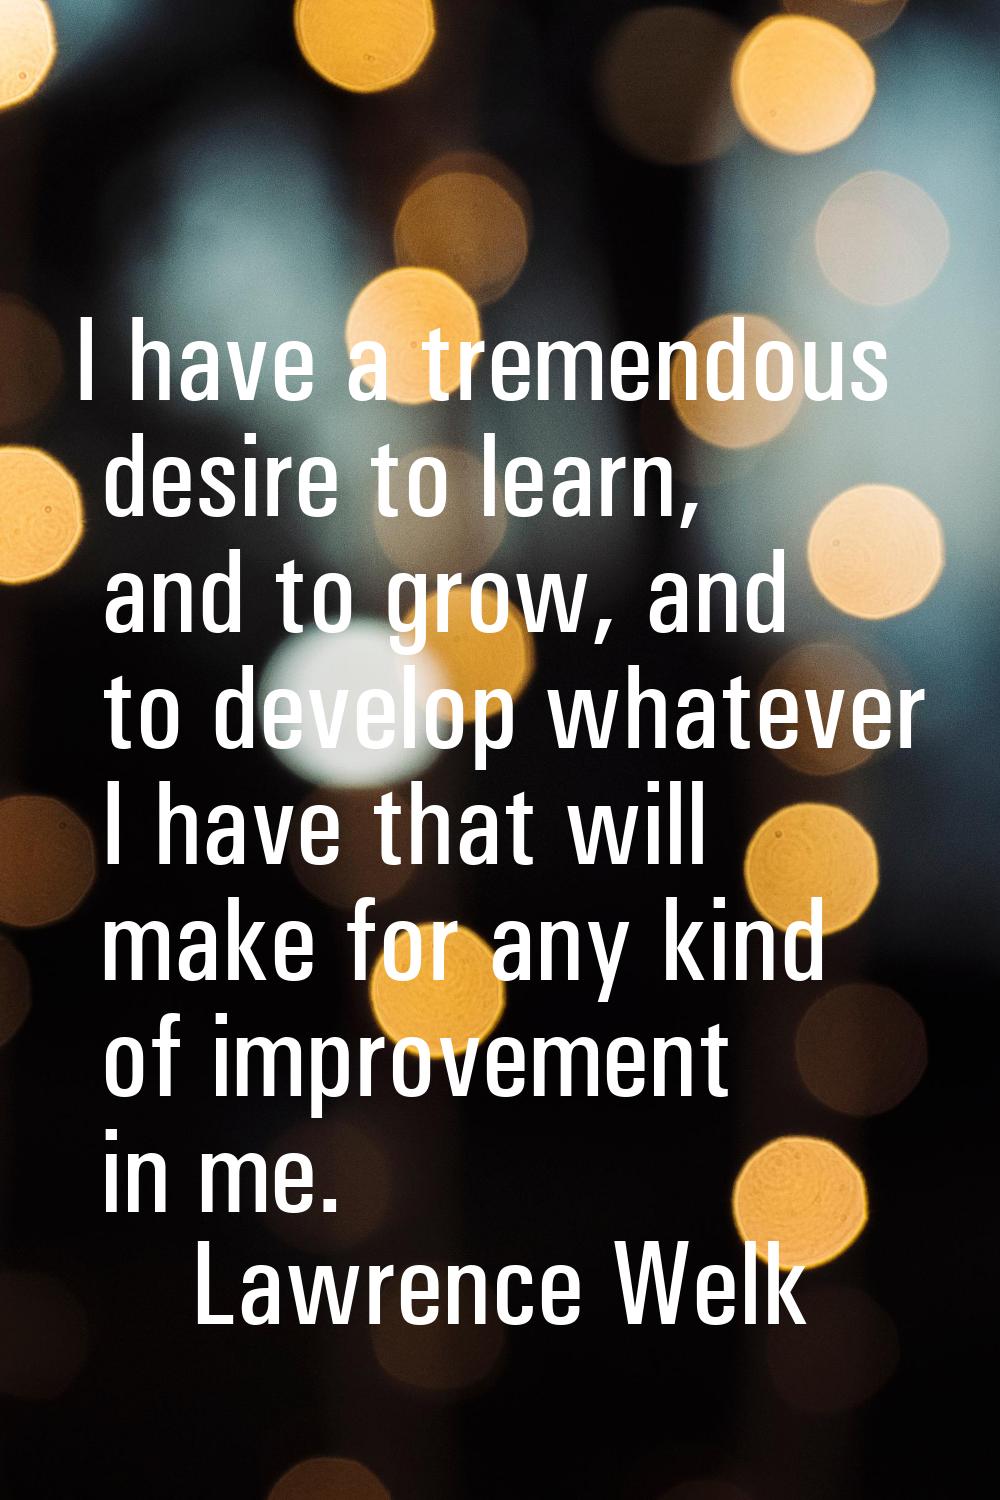 I have a tremendous desire to learn, and to grow, and to develop whatever I have that will make for